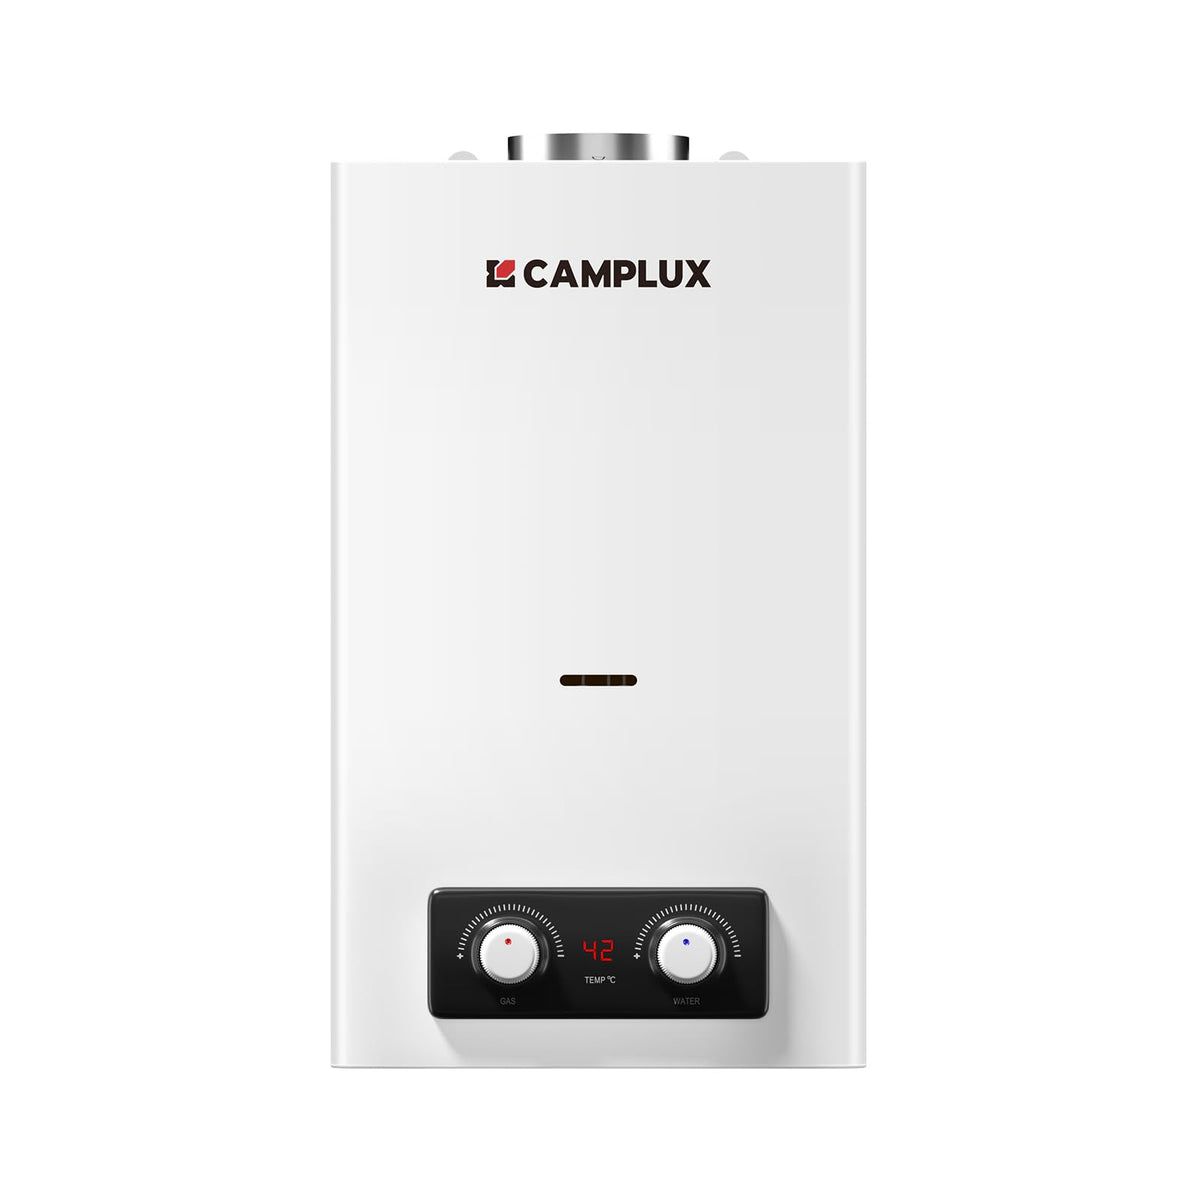 CAMPLUX BD300NG 11 L/min Gas Water Heater Domestic Low NOx/ErP, Indoor Natural Gas Shower, for Household/Bathroom/Kitchen